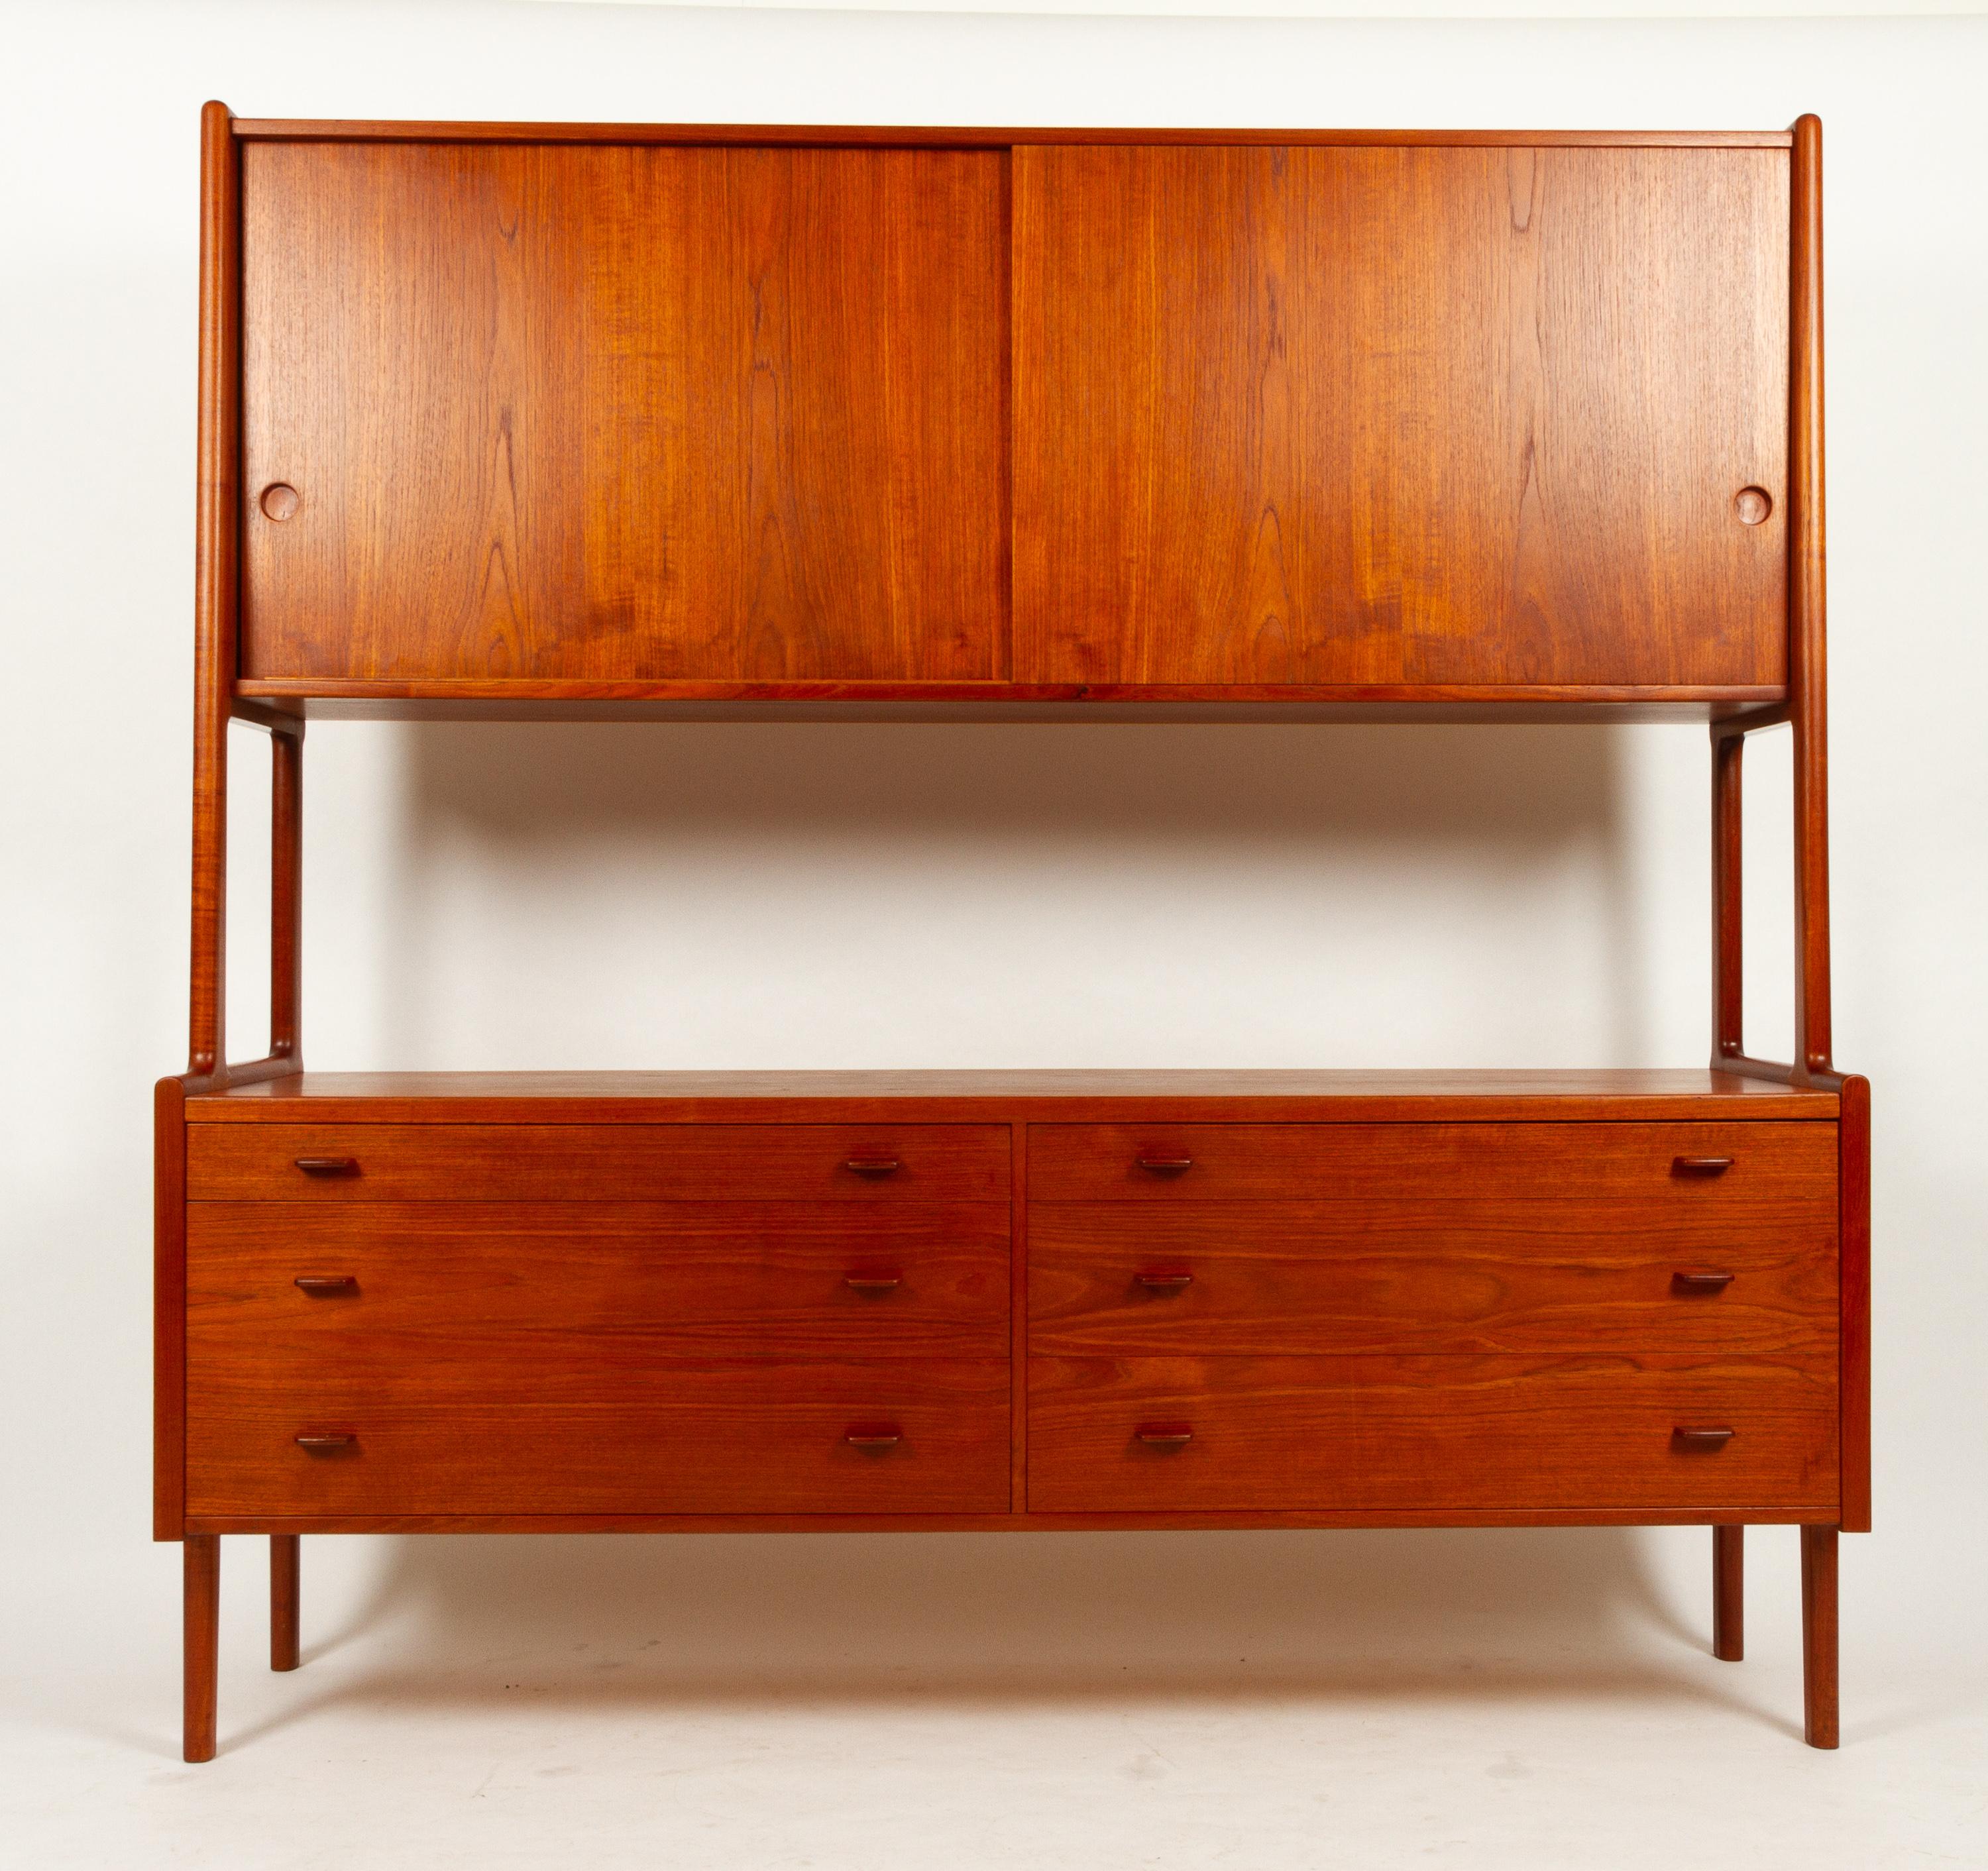 Danish Teak Sideboard by H. J. Wegner for Ry Møbler 1955. Model Ry 20.
Tall two-tiered teak highboard with six wide drawers and two cabinets with shelves. Rounded tapered legs. Inside of cabinets and drawers in light wood.
Beautiful golden teak